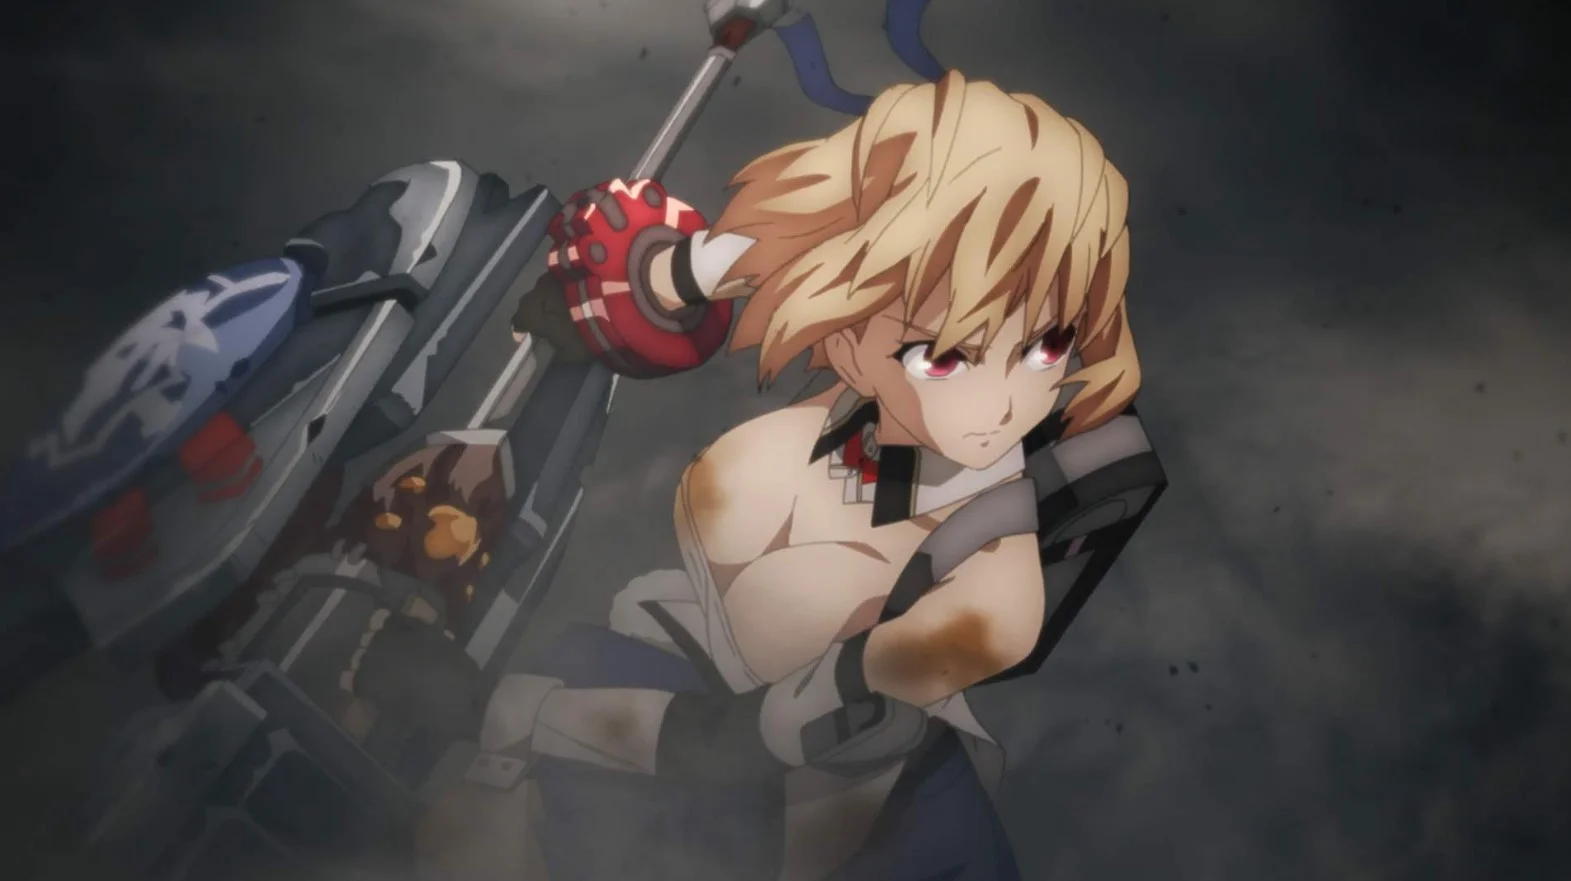 God Eater Season 2 Release Date: What will be the source material?